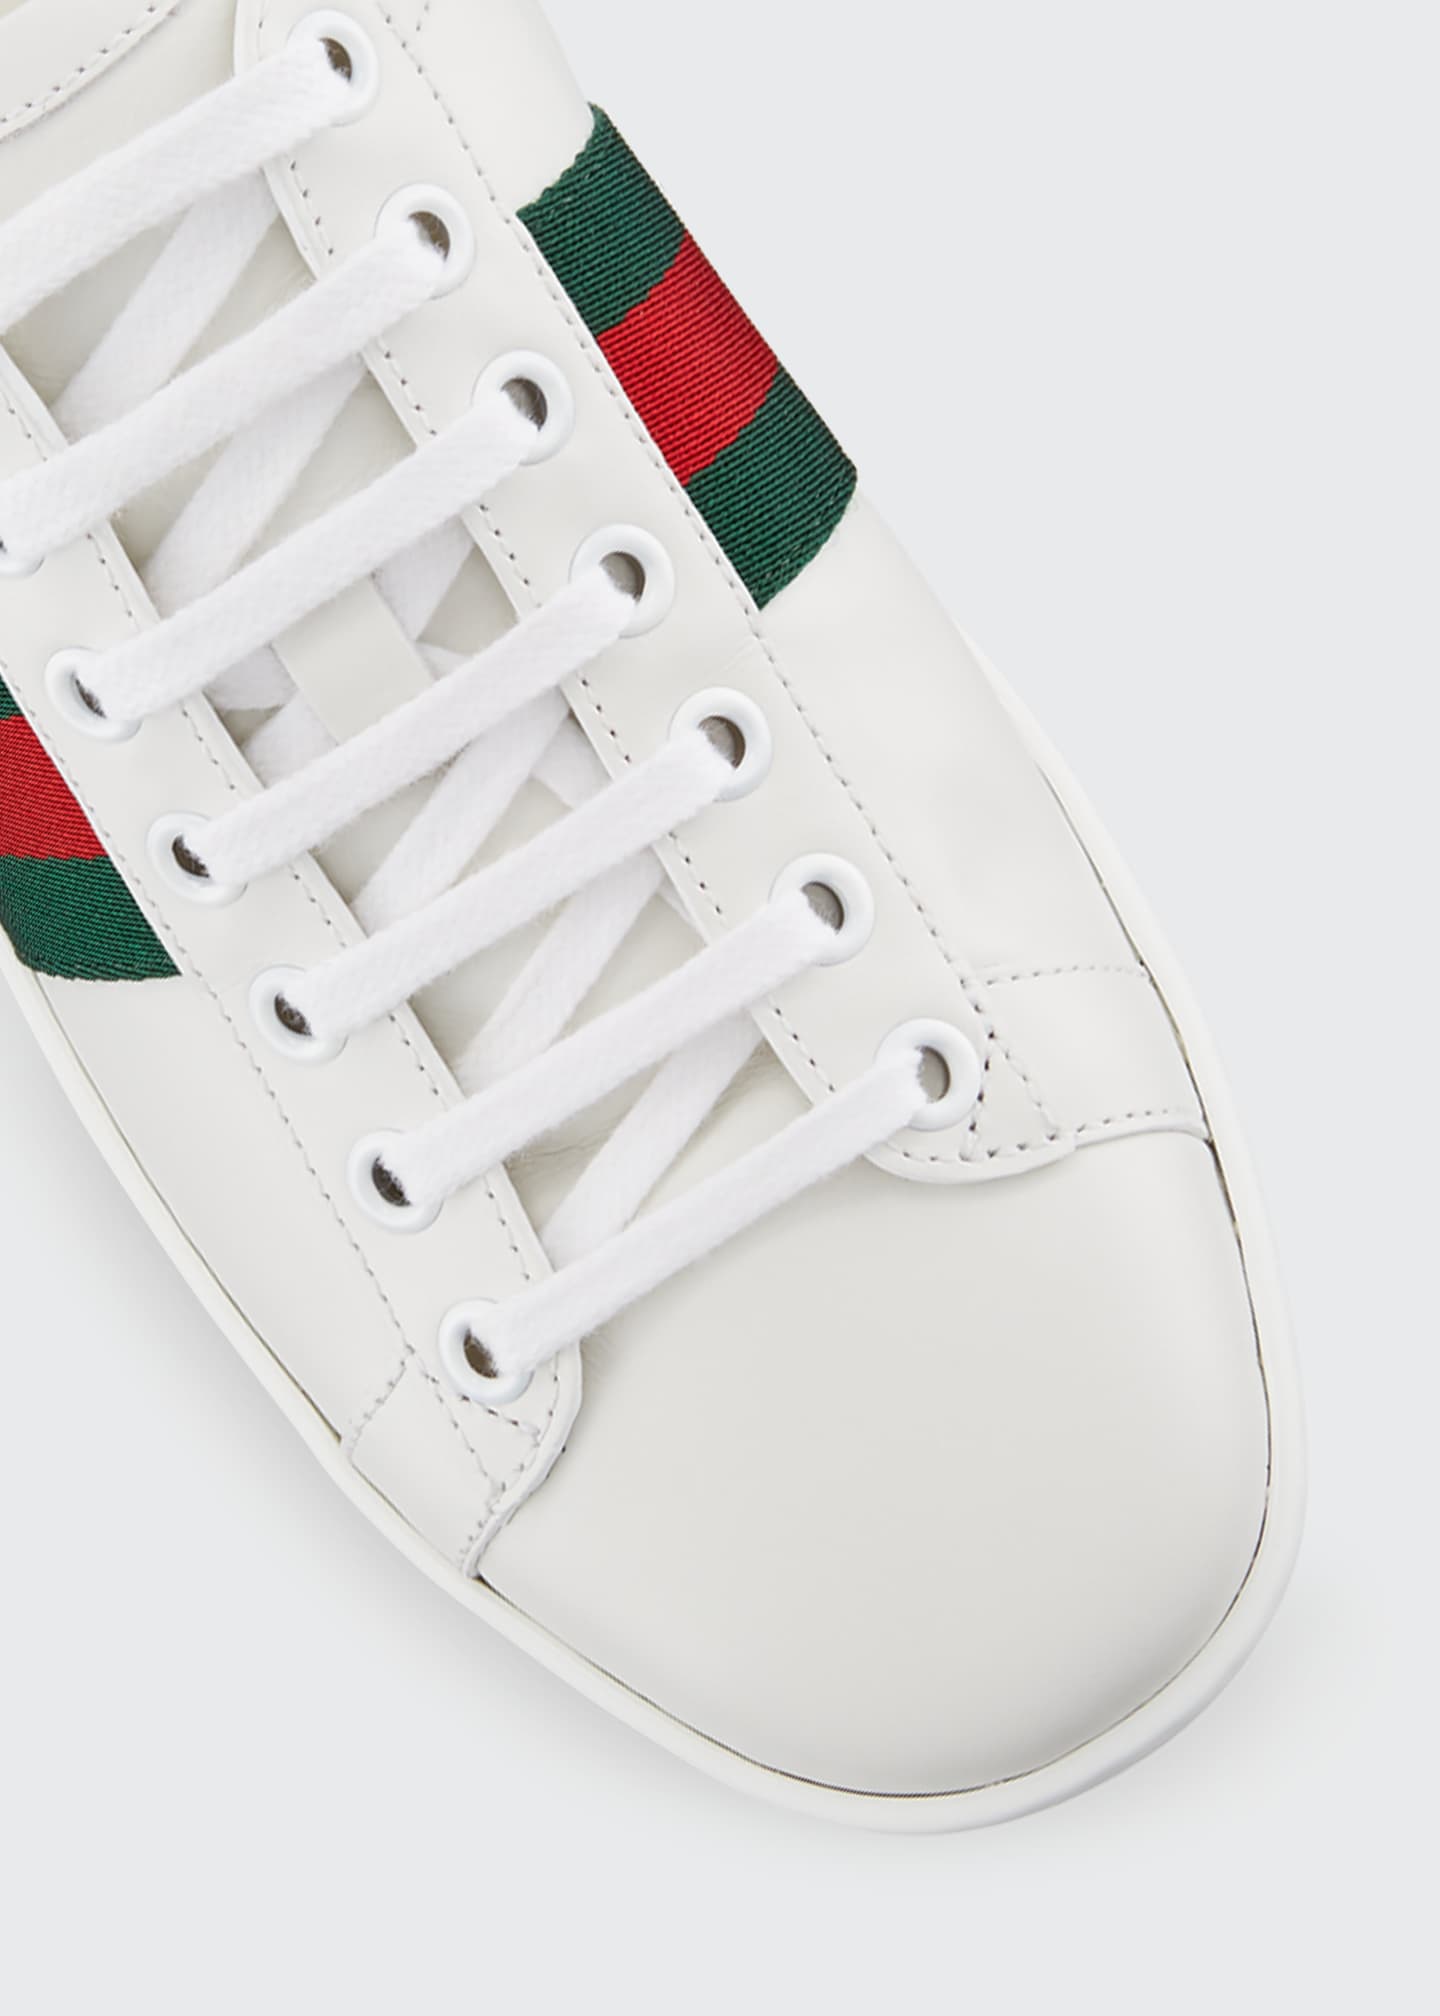 Gucci Ace Star & Bee Sneakers Image 5 of 5